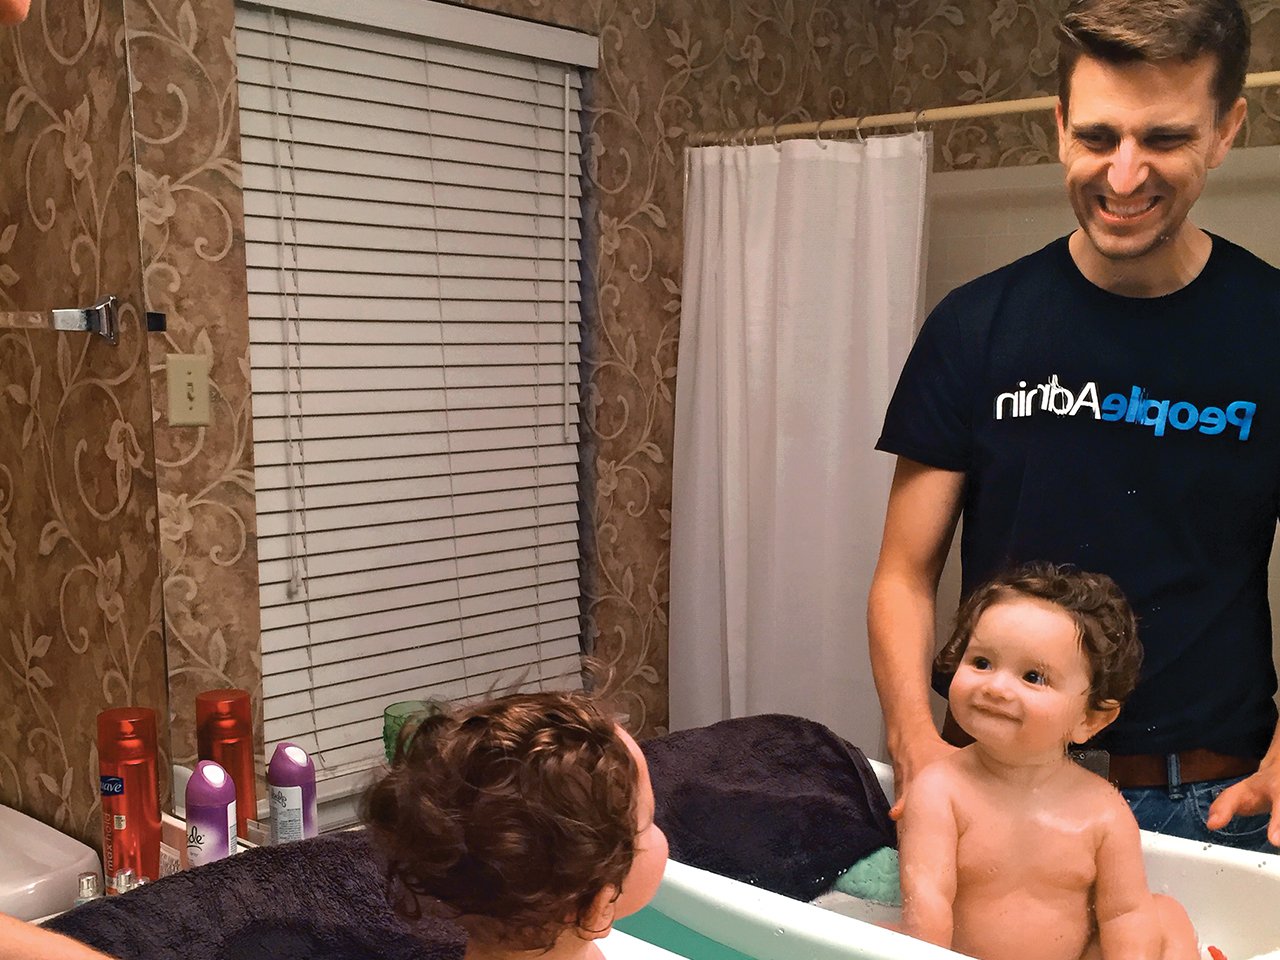 Dad and son are all smiles during a bath